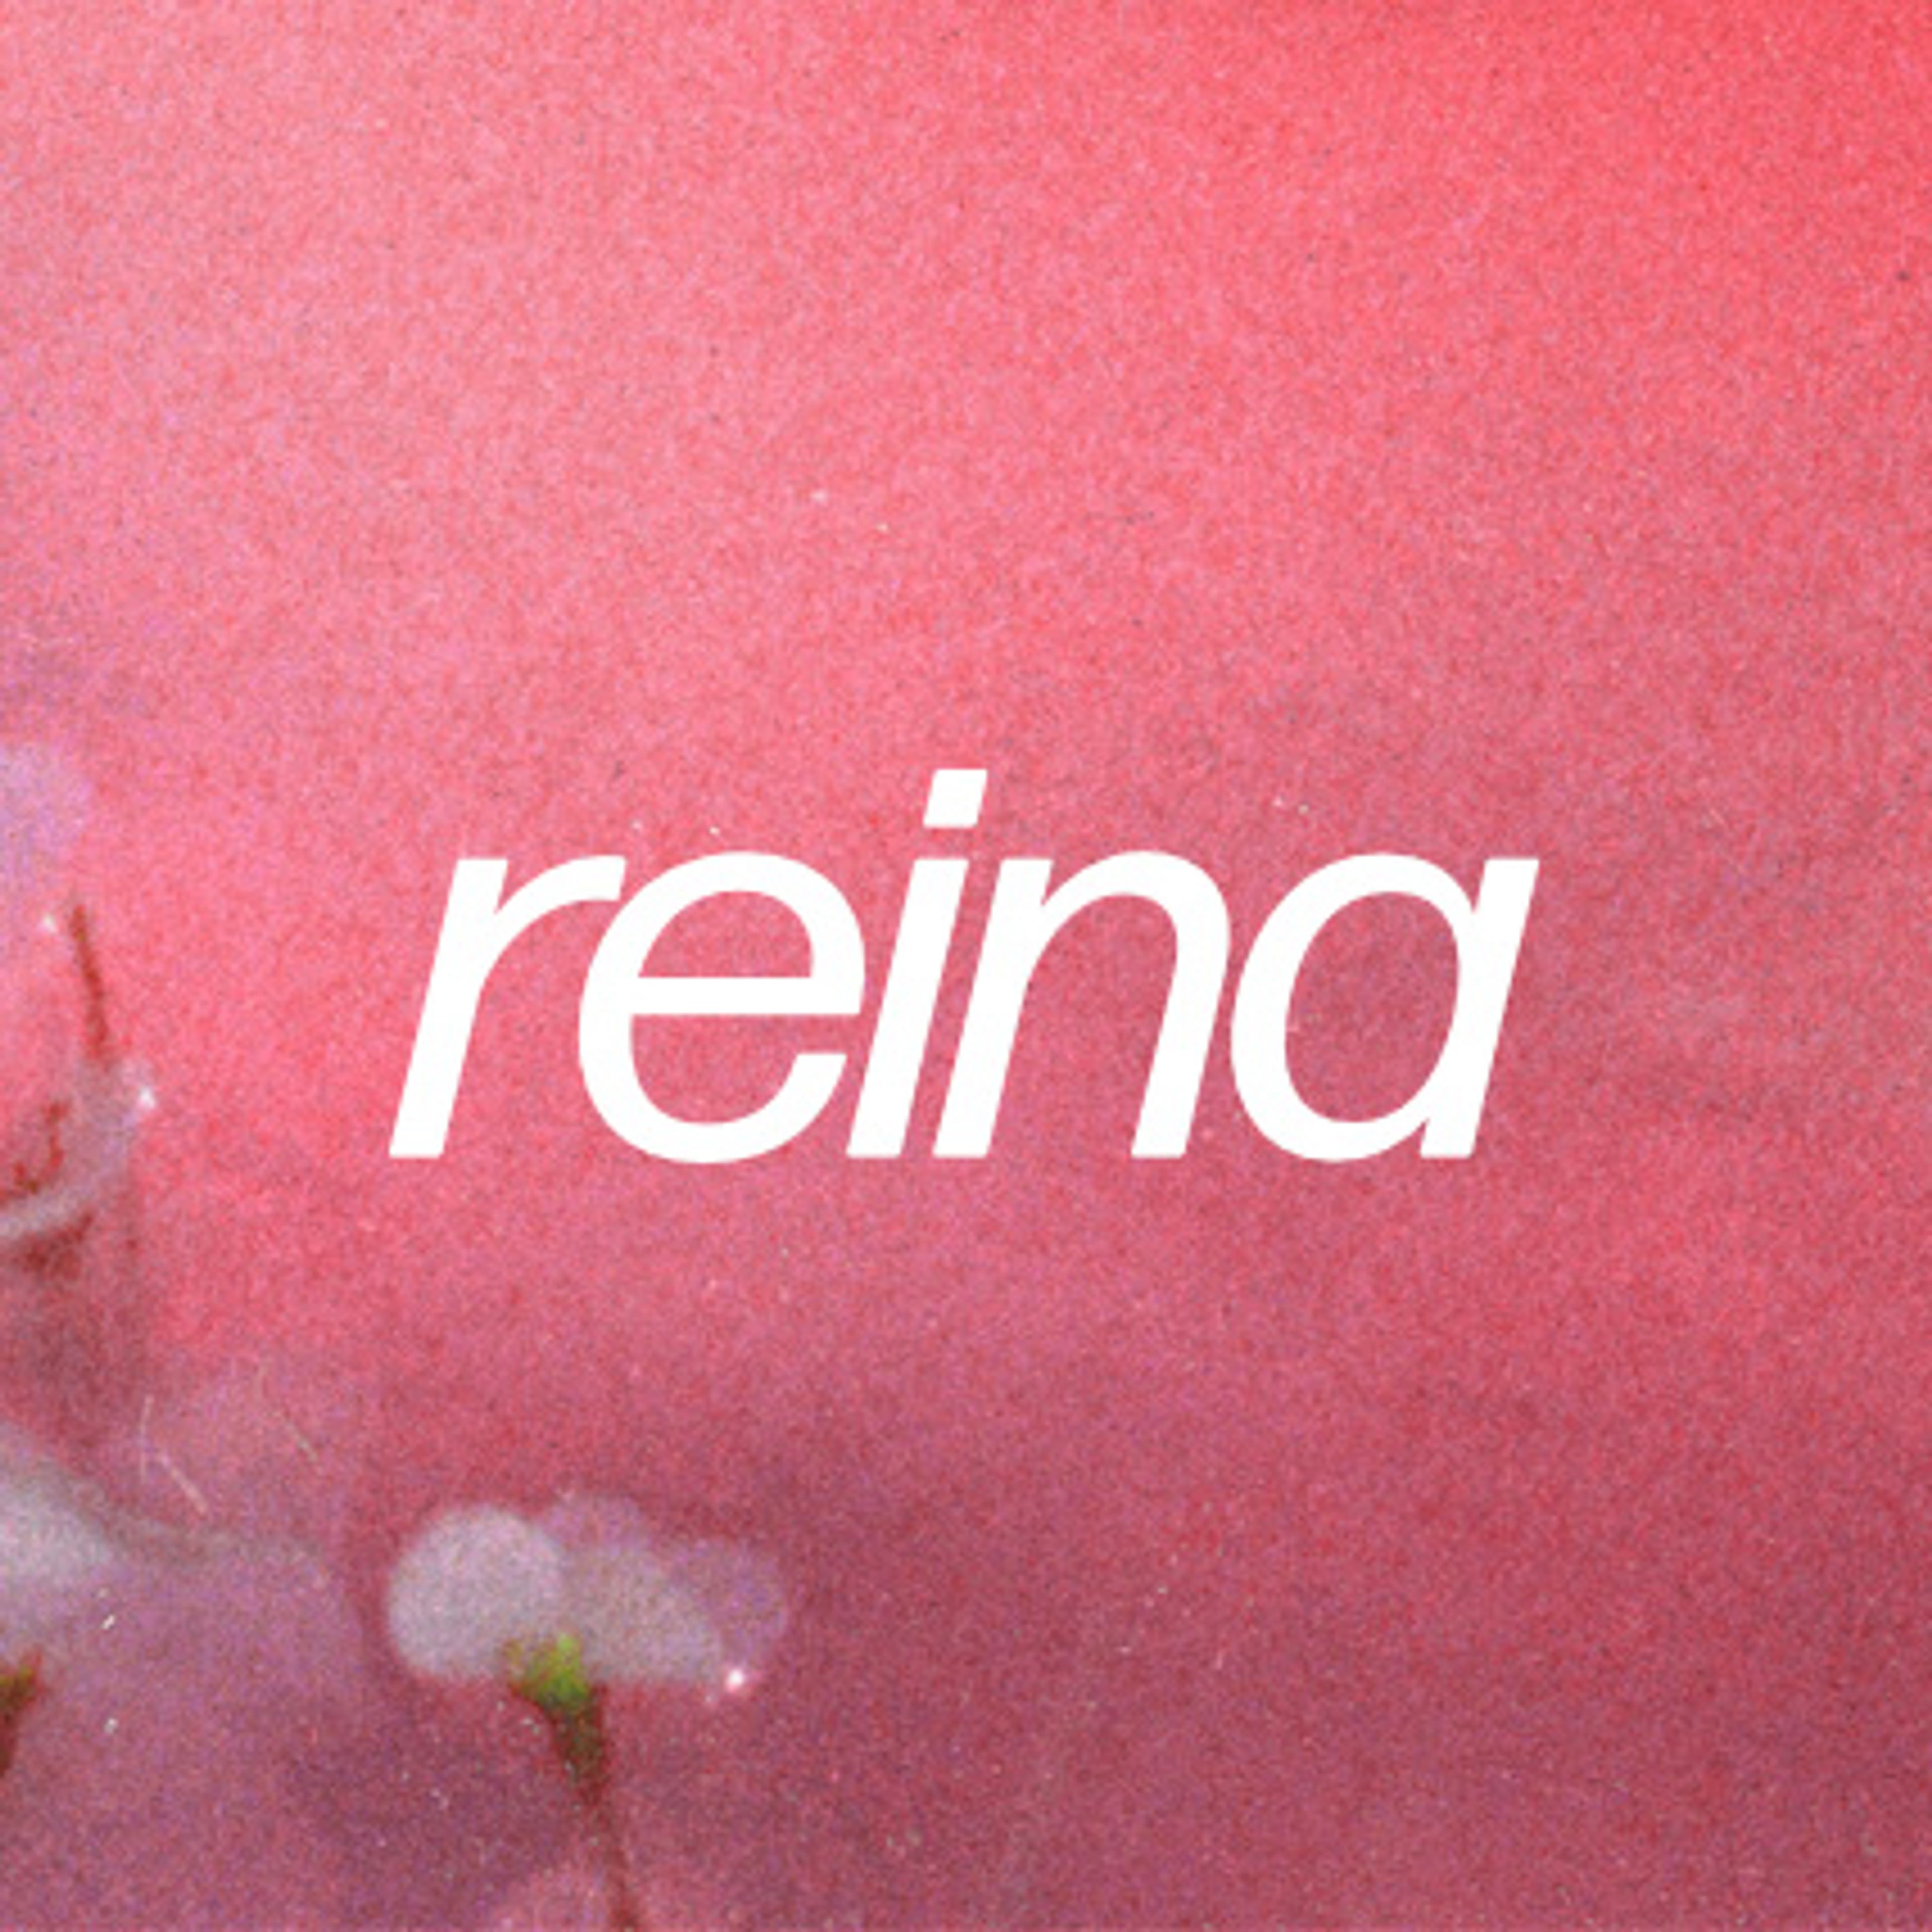 Logo for reina. There is a grainy texture overlay on a soft pink background. In the foreground, the word "reina" is centered in a lowercase, sans-serif font, with a crisp white color that stands out against the warm backdrop. In the bottom left corner, there are faint silhouettes of delicate white flowers with slender stems, partially obscured by the grainy overlay.